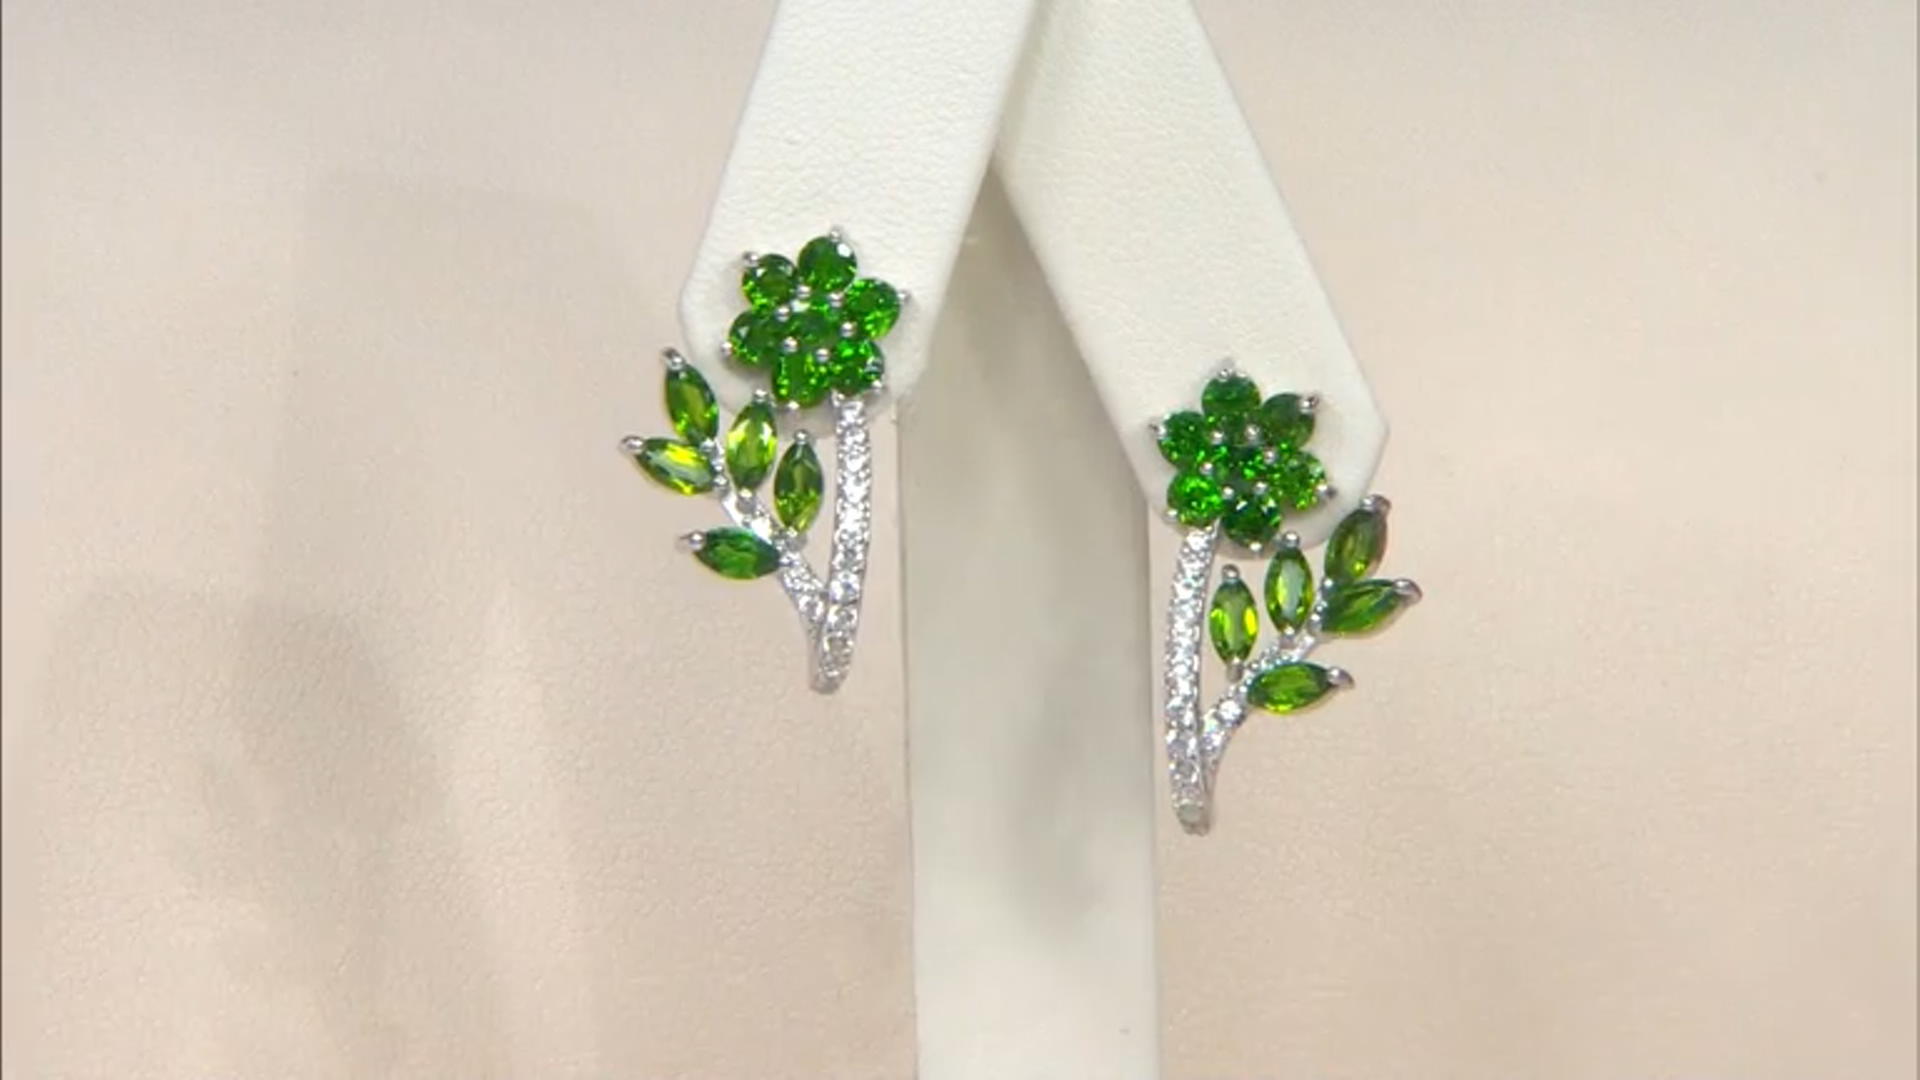 Green Chrome Diopside Rhodium Over Sterling Silver Earrings. 3.55 Video Thumbnail